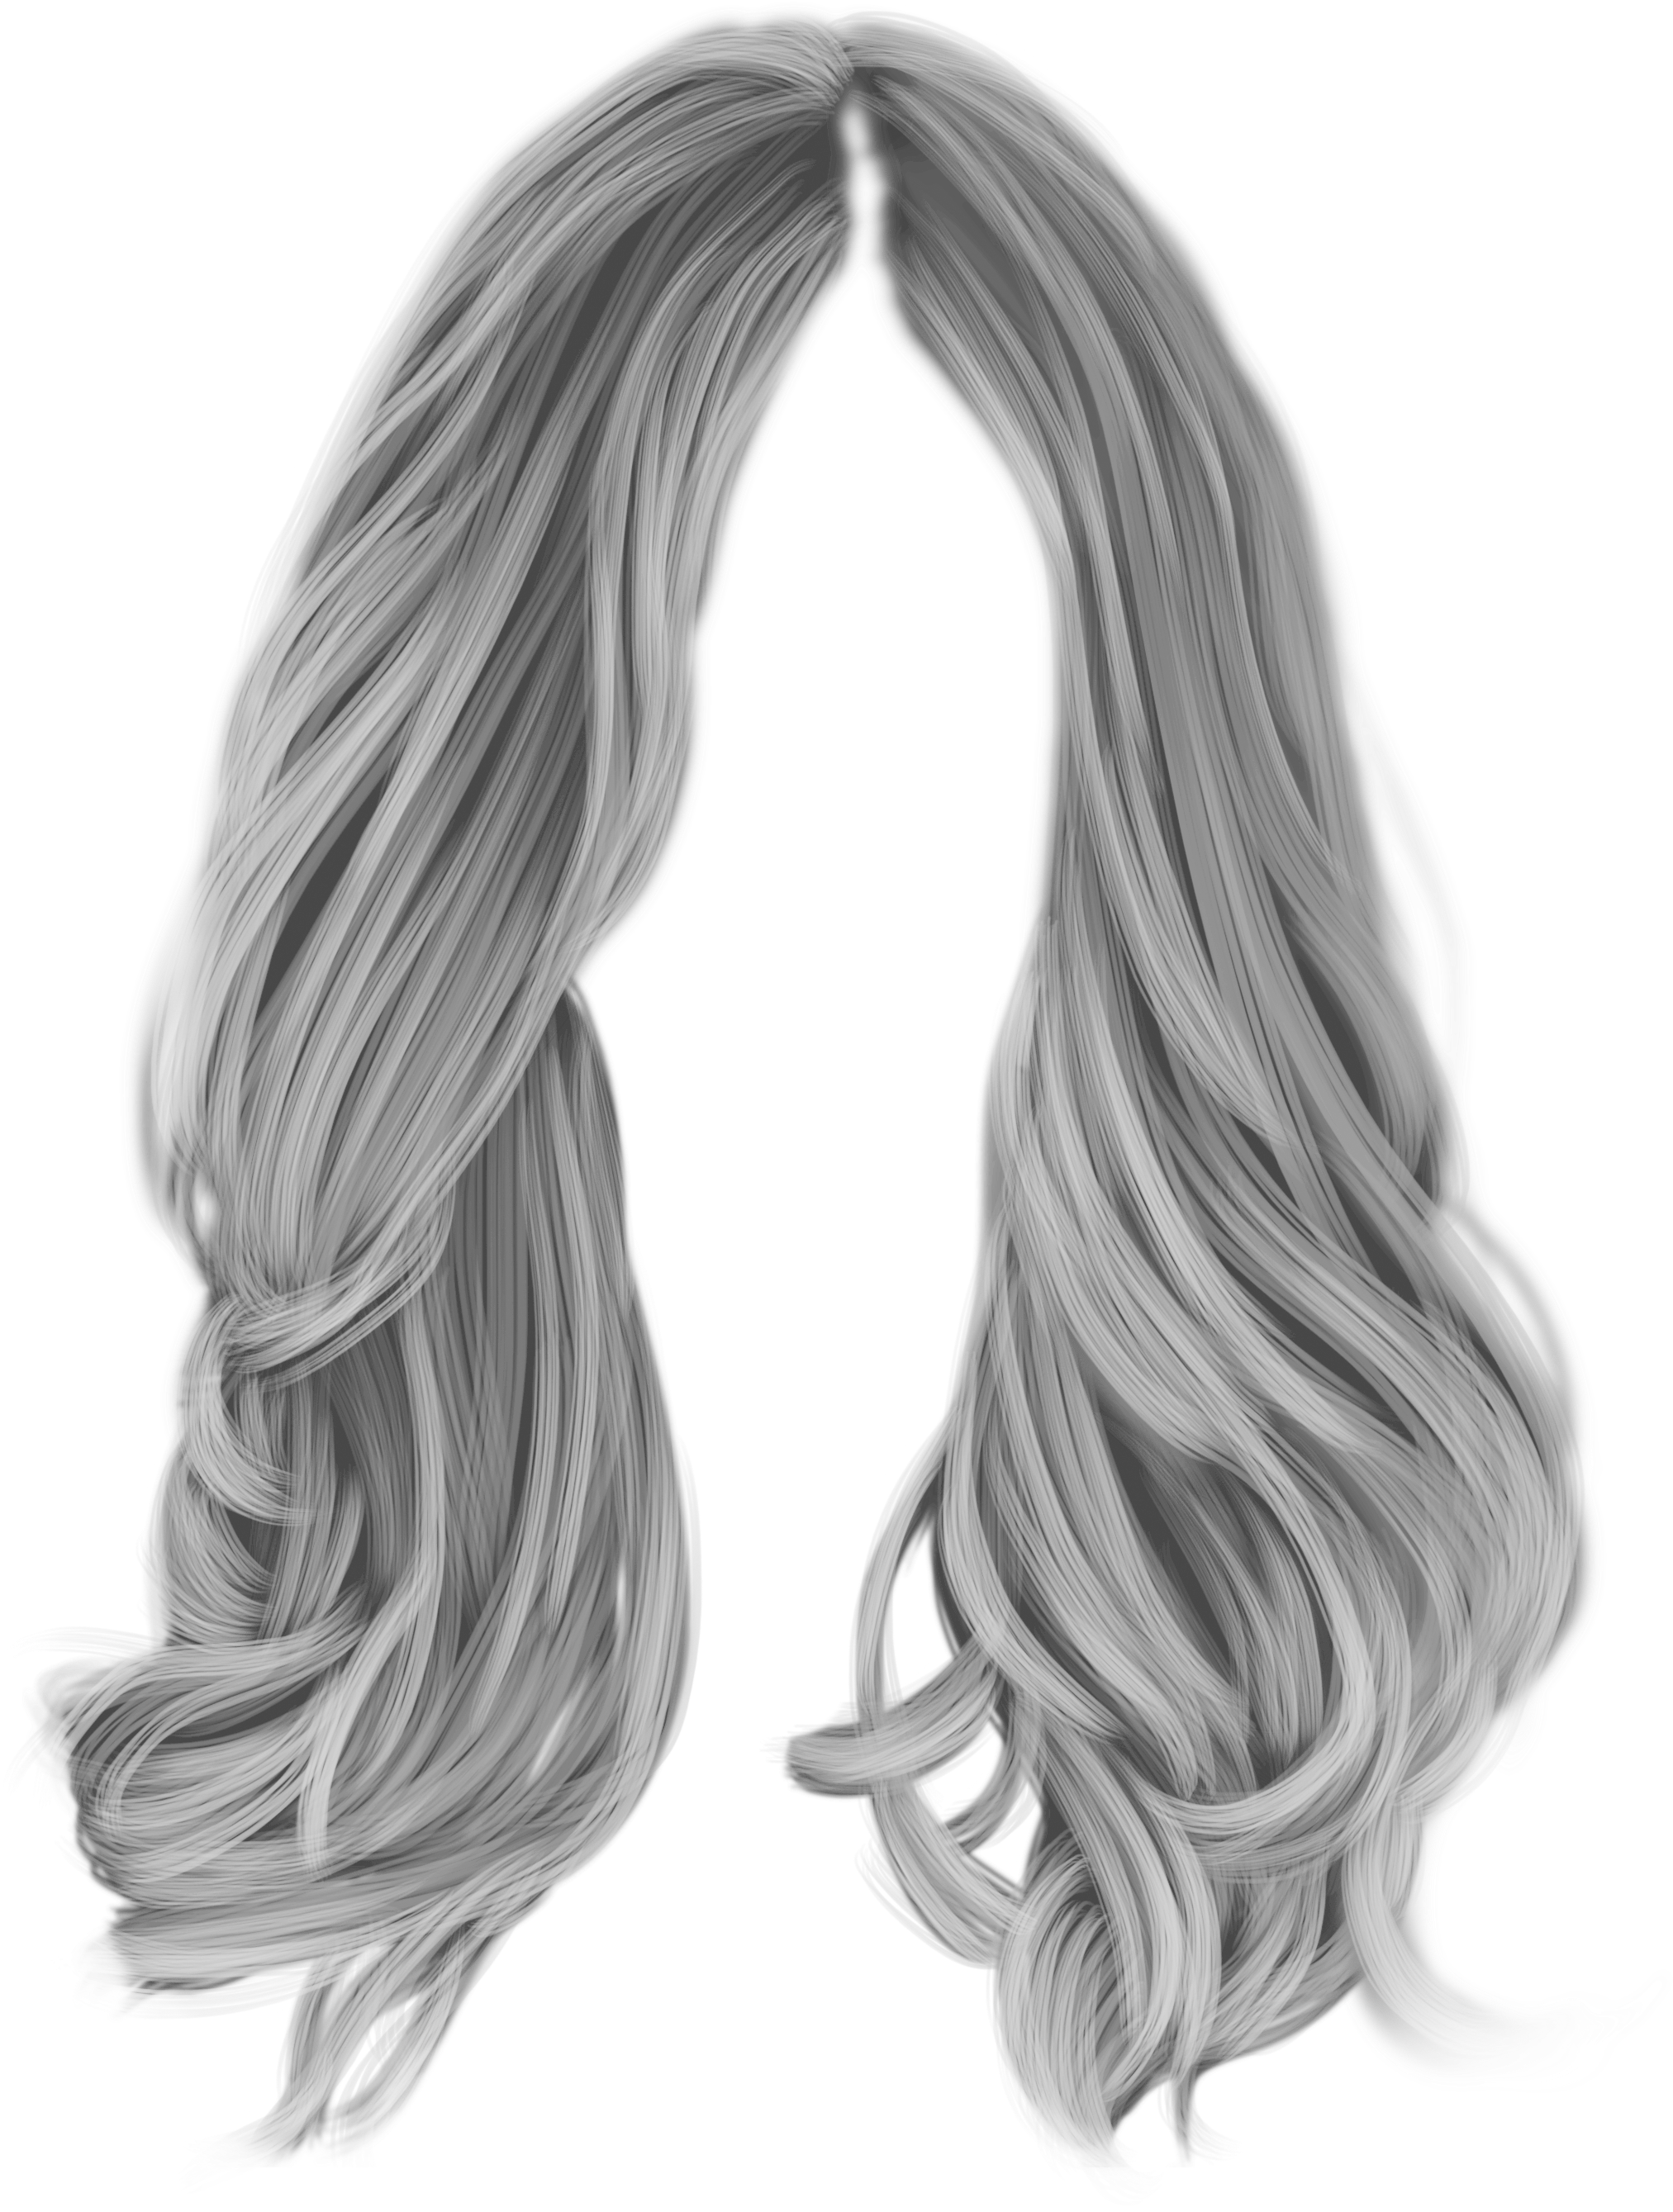 Hair wig PNG transparent image download, size: 752x837px